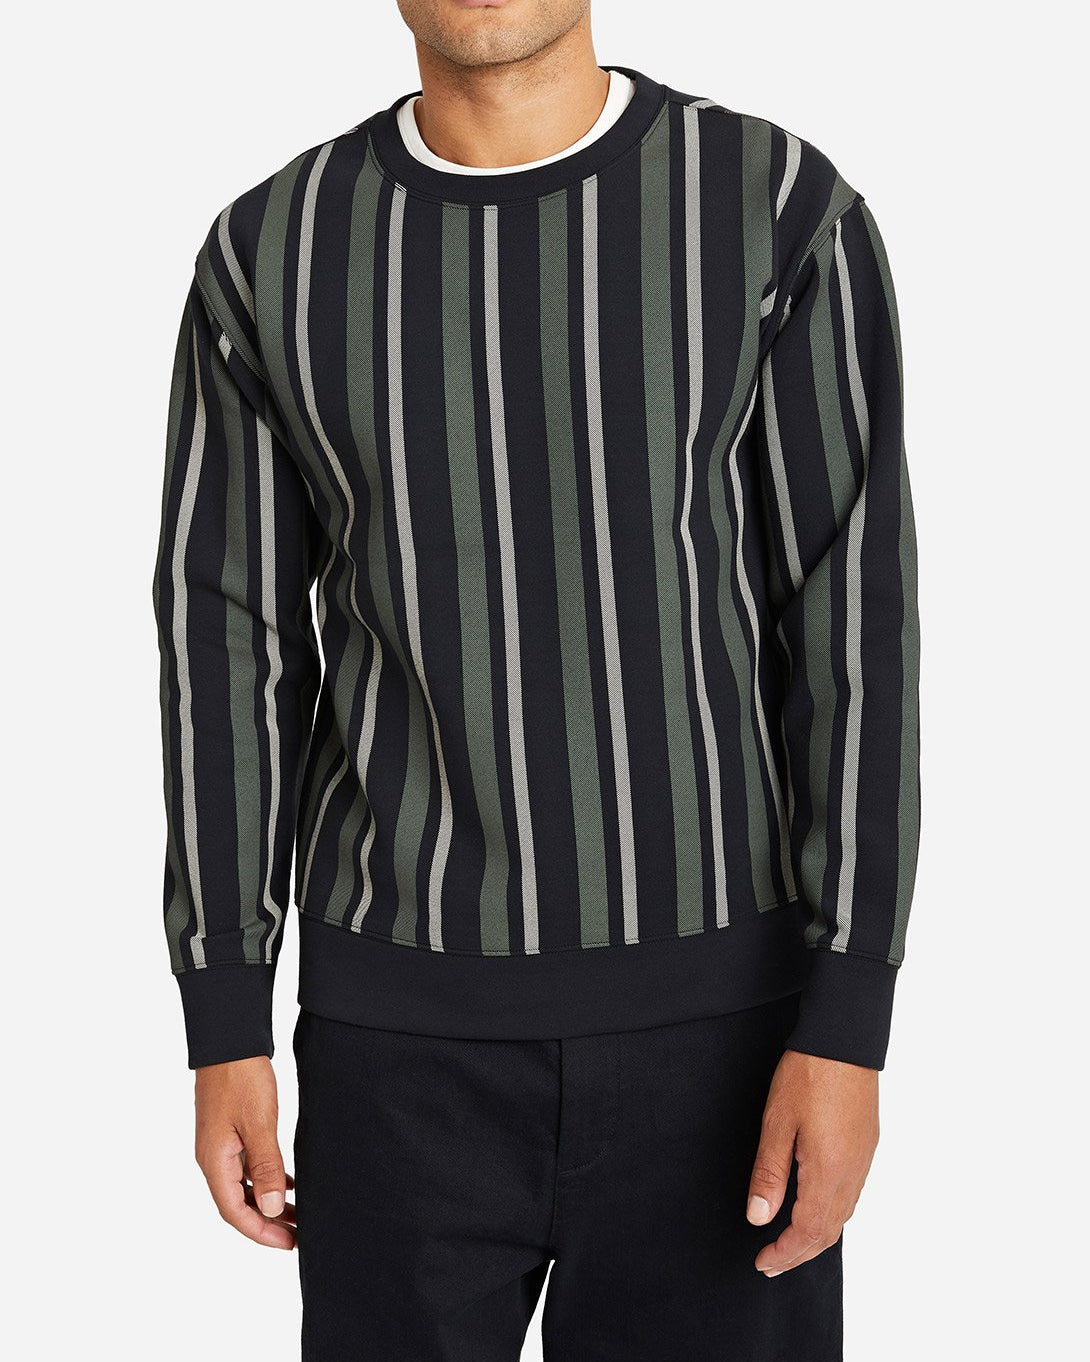 GREEN STRIPE mens long sleeve t shirts angelo crew ons clothing